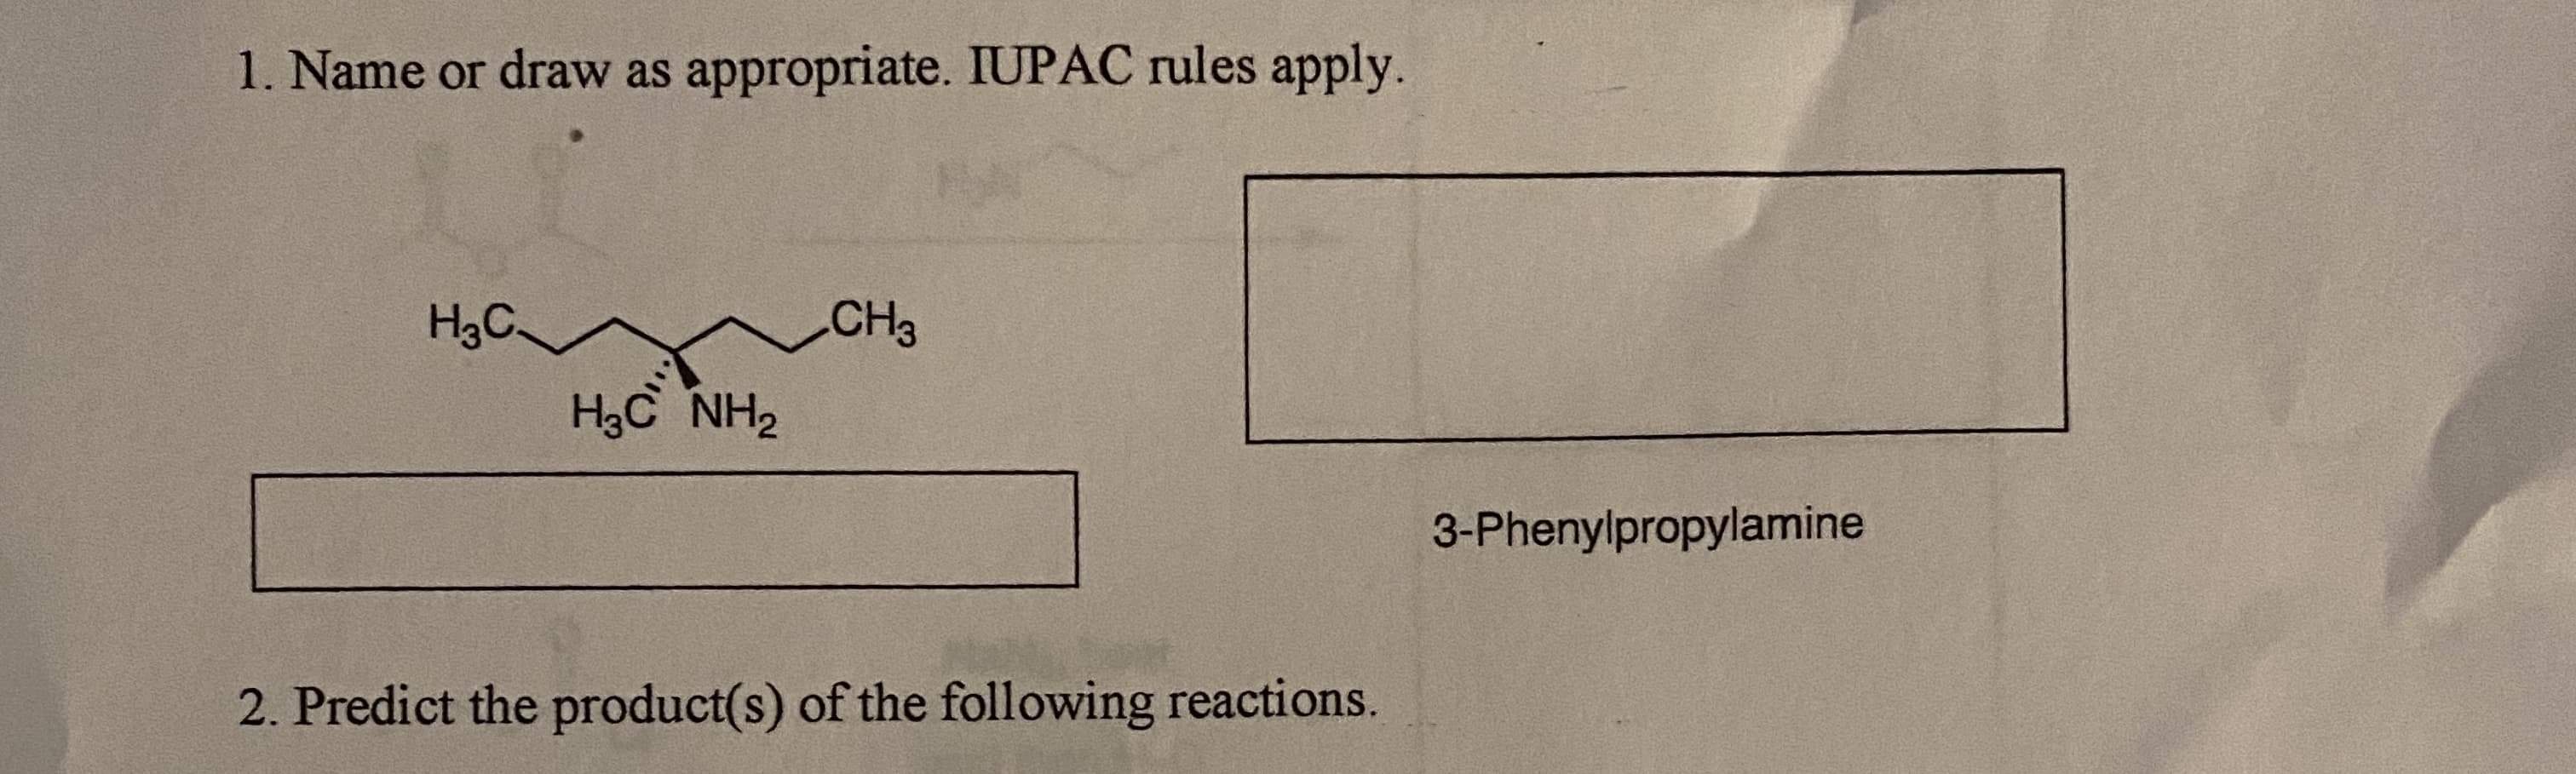 1. Name or draw as appropriate. IUPAC rules apply.
H3C.
.CHз
Hас Nна
3-Phenylpropylamine
